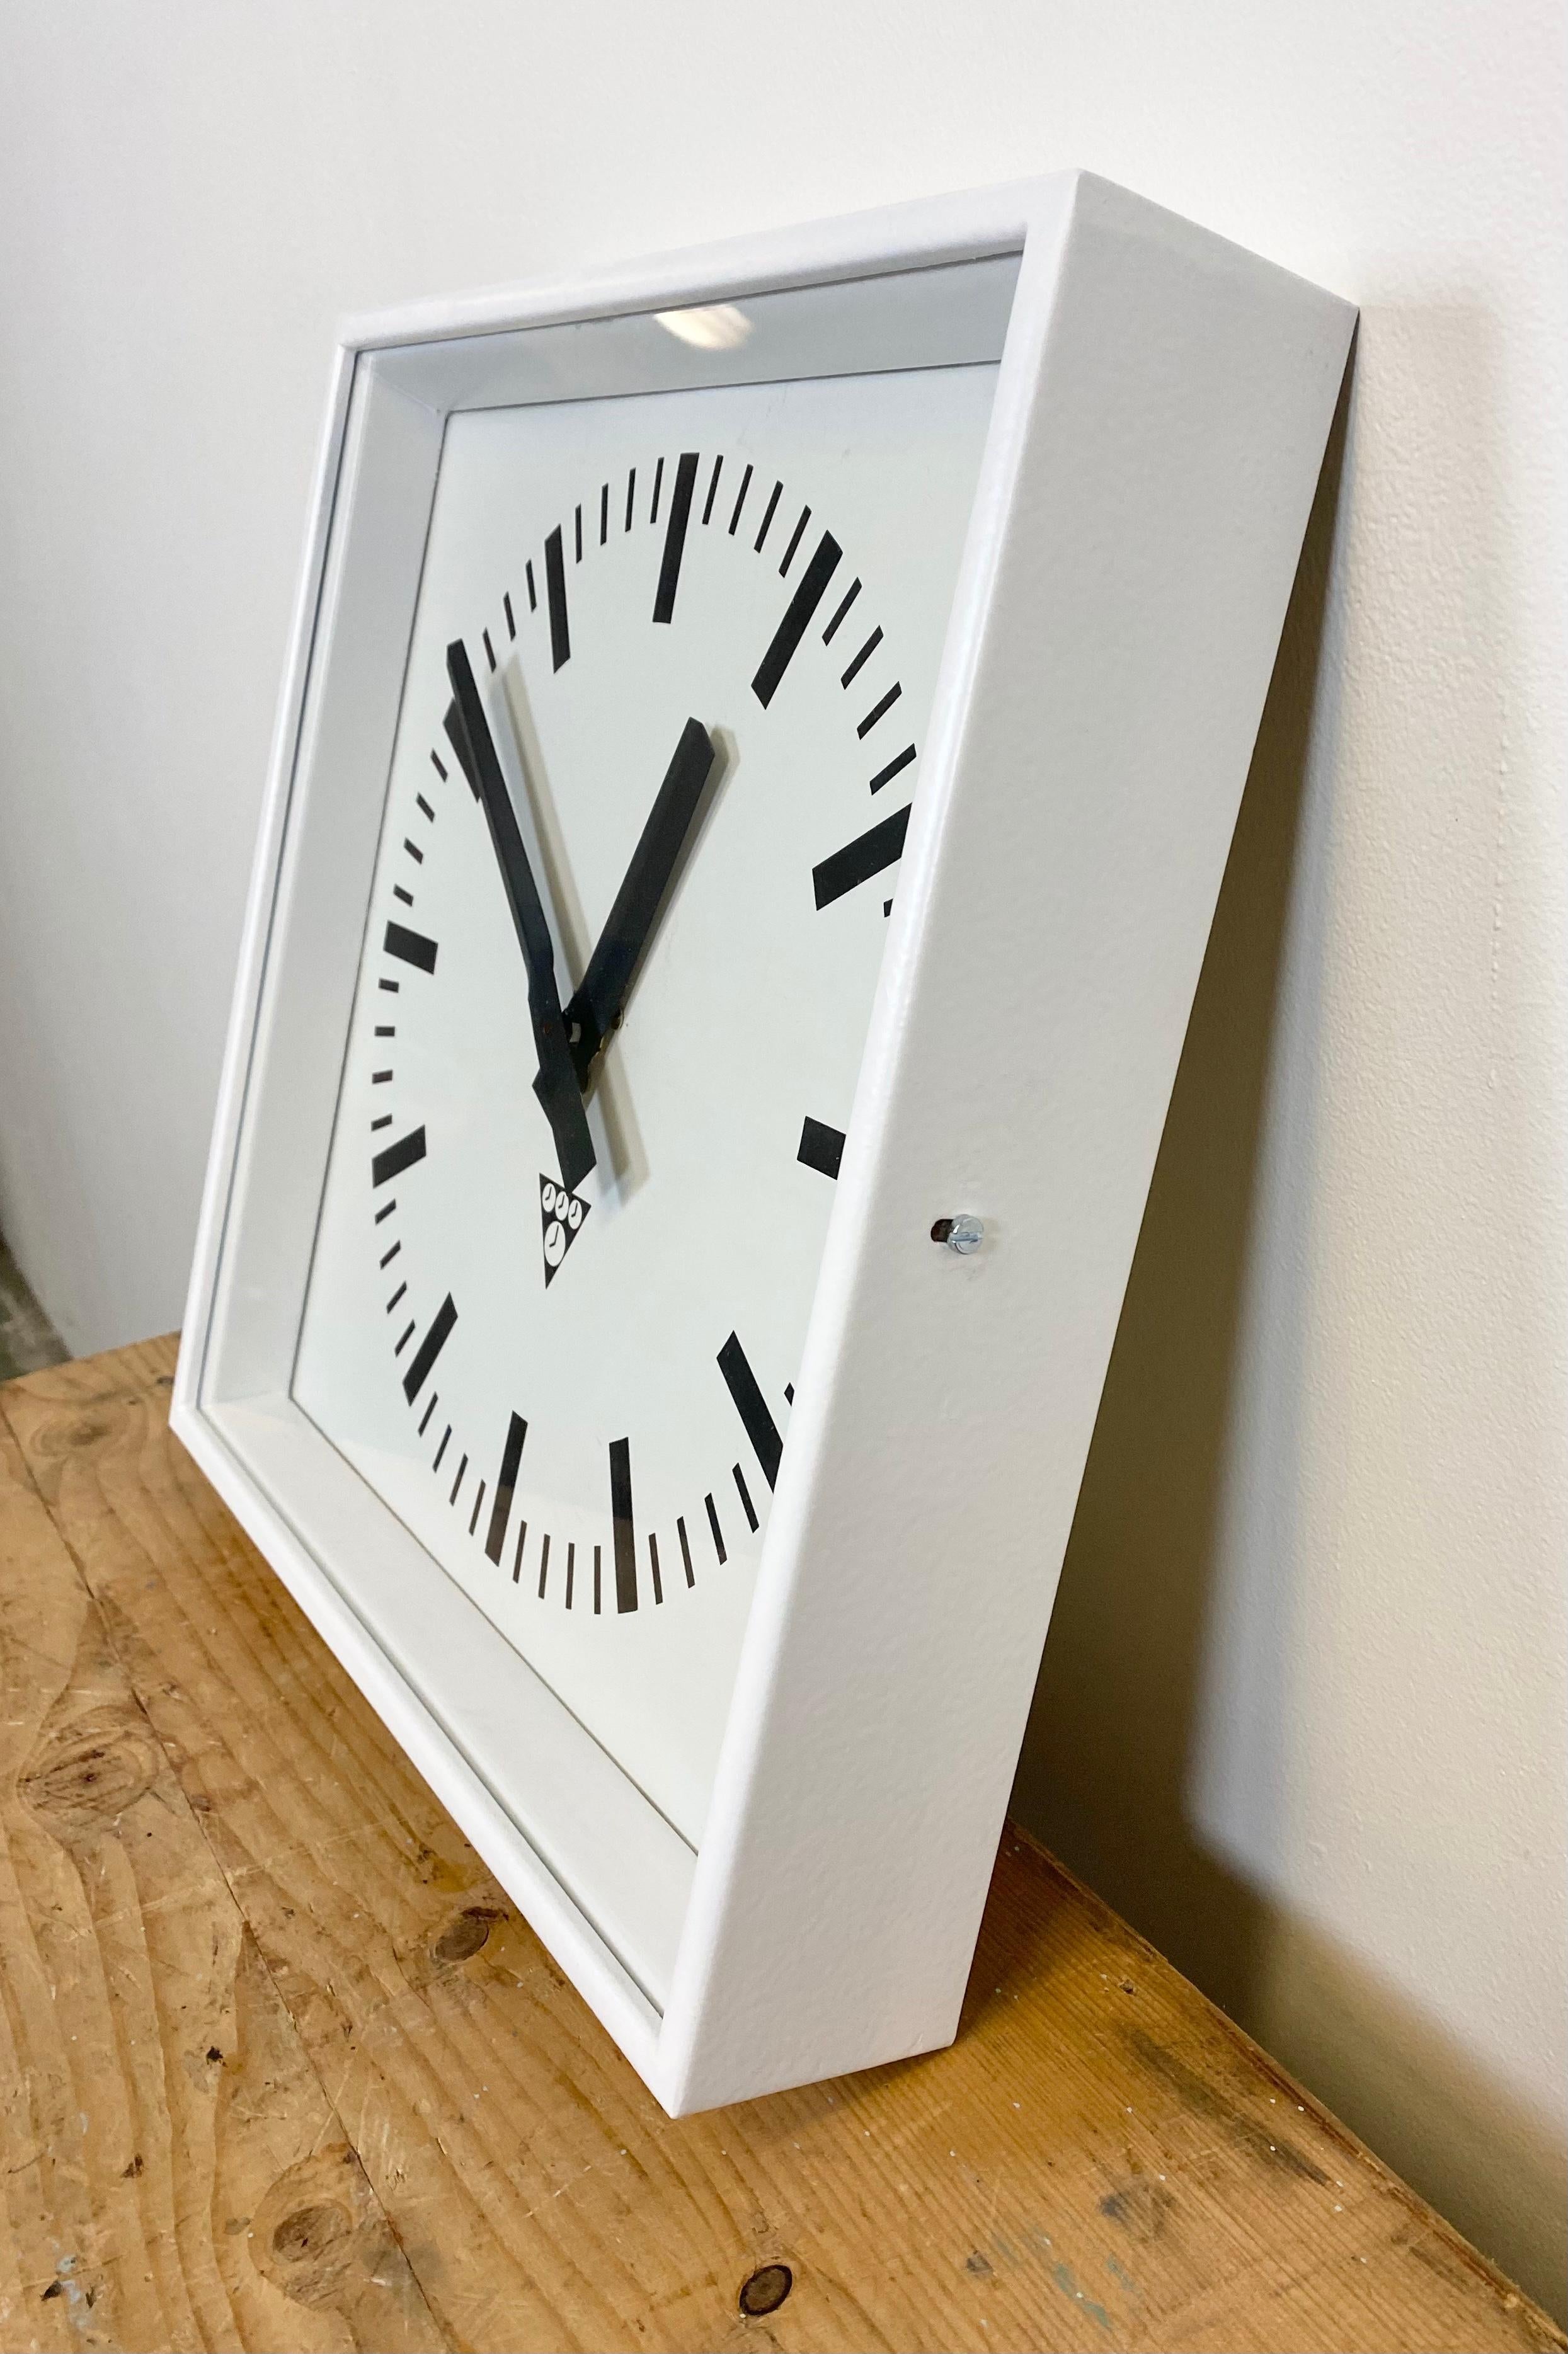 Czech White Industrial Square Wall Clock from Pragotron, 1970s